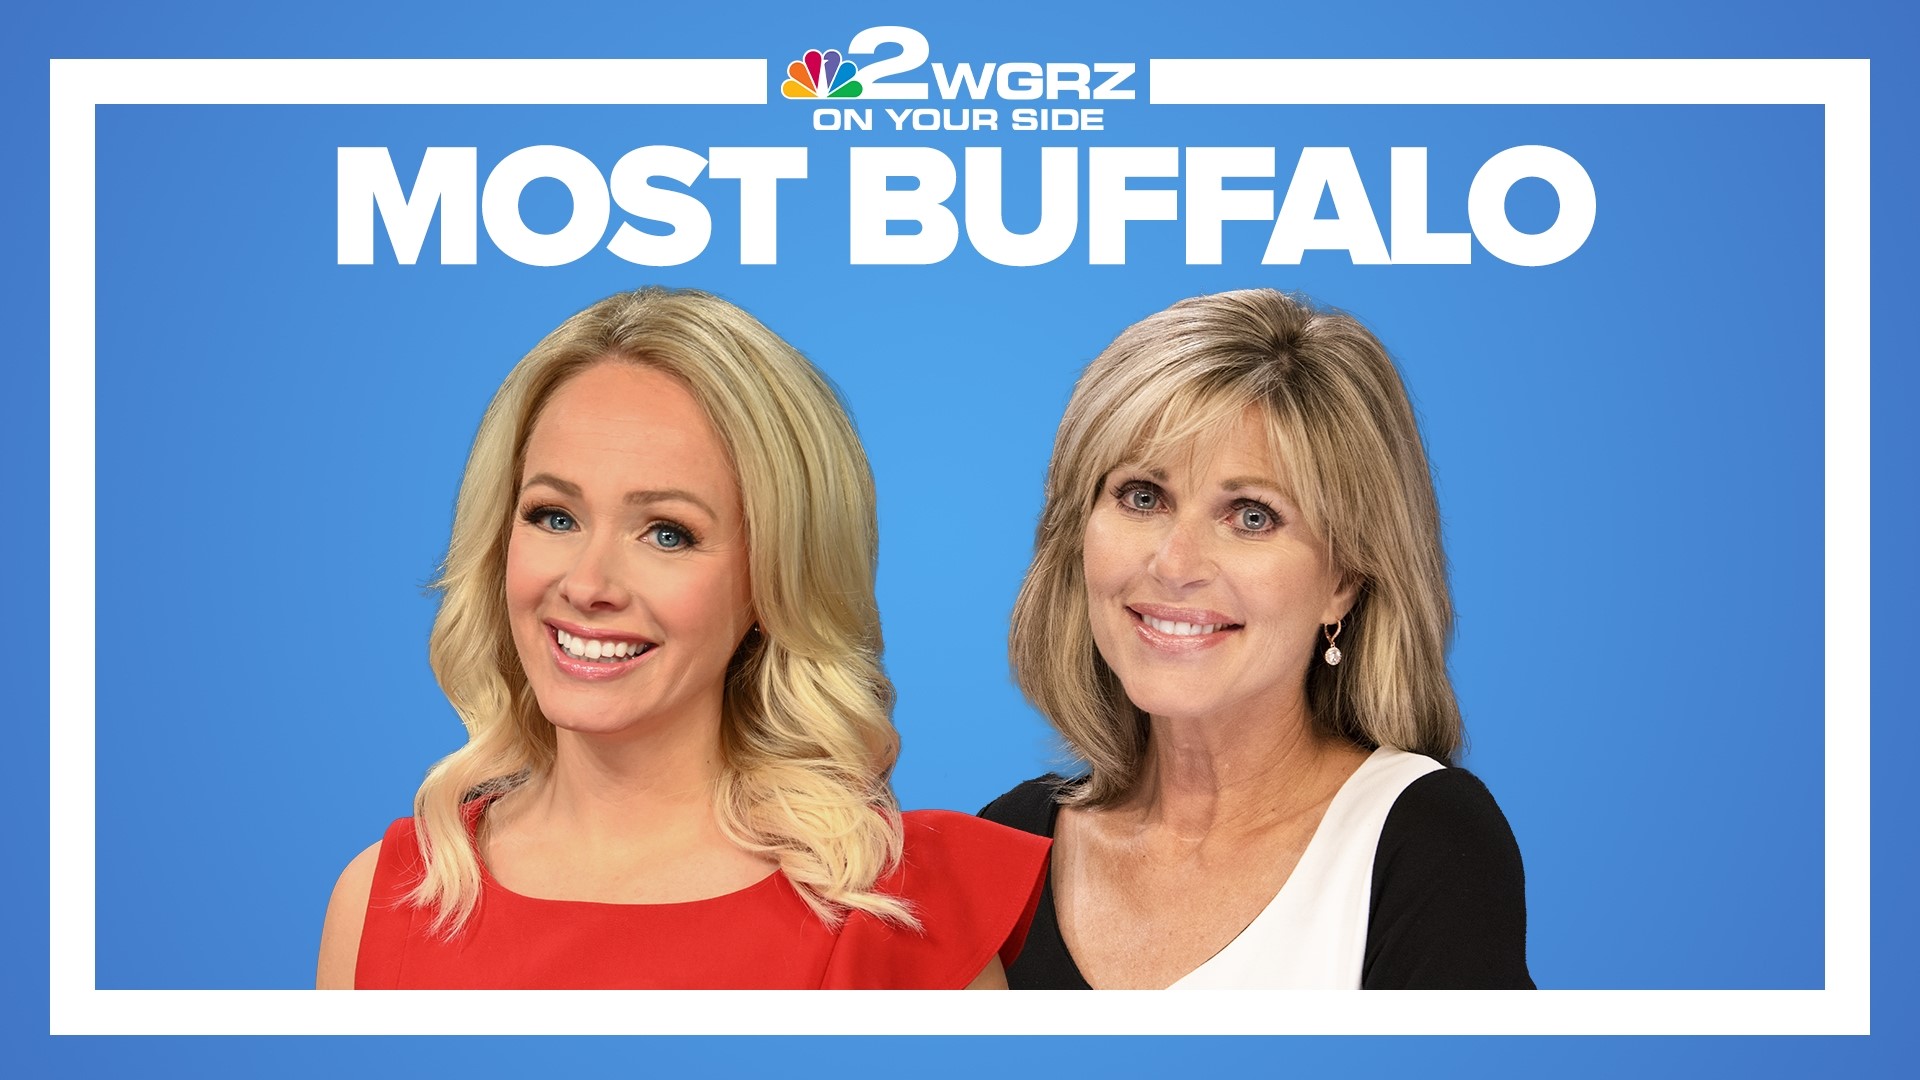 The most news. The most fun. Most Buffalo, hosted by WGRZ’s Kate Welshofer and Maria Genero.
